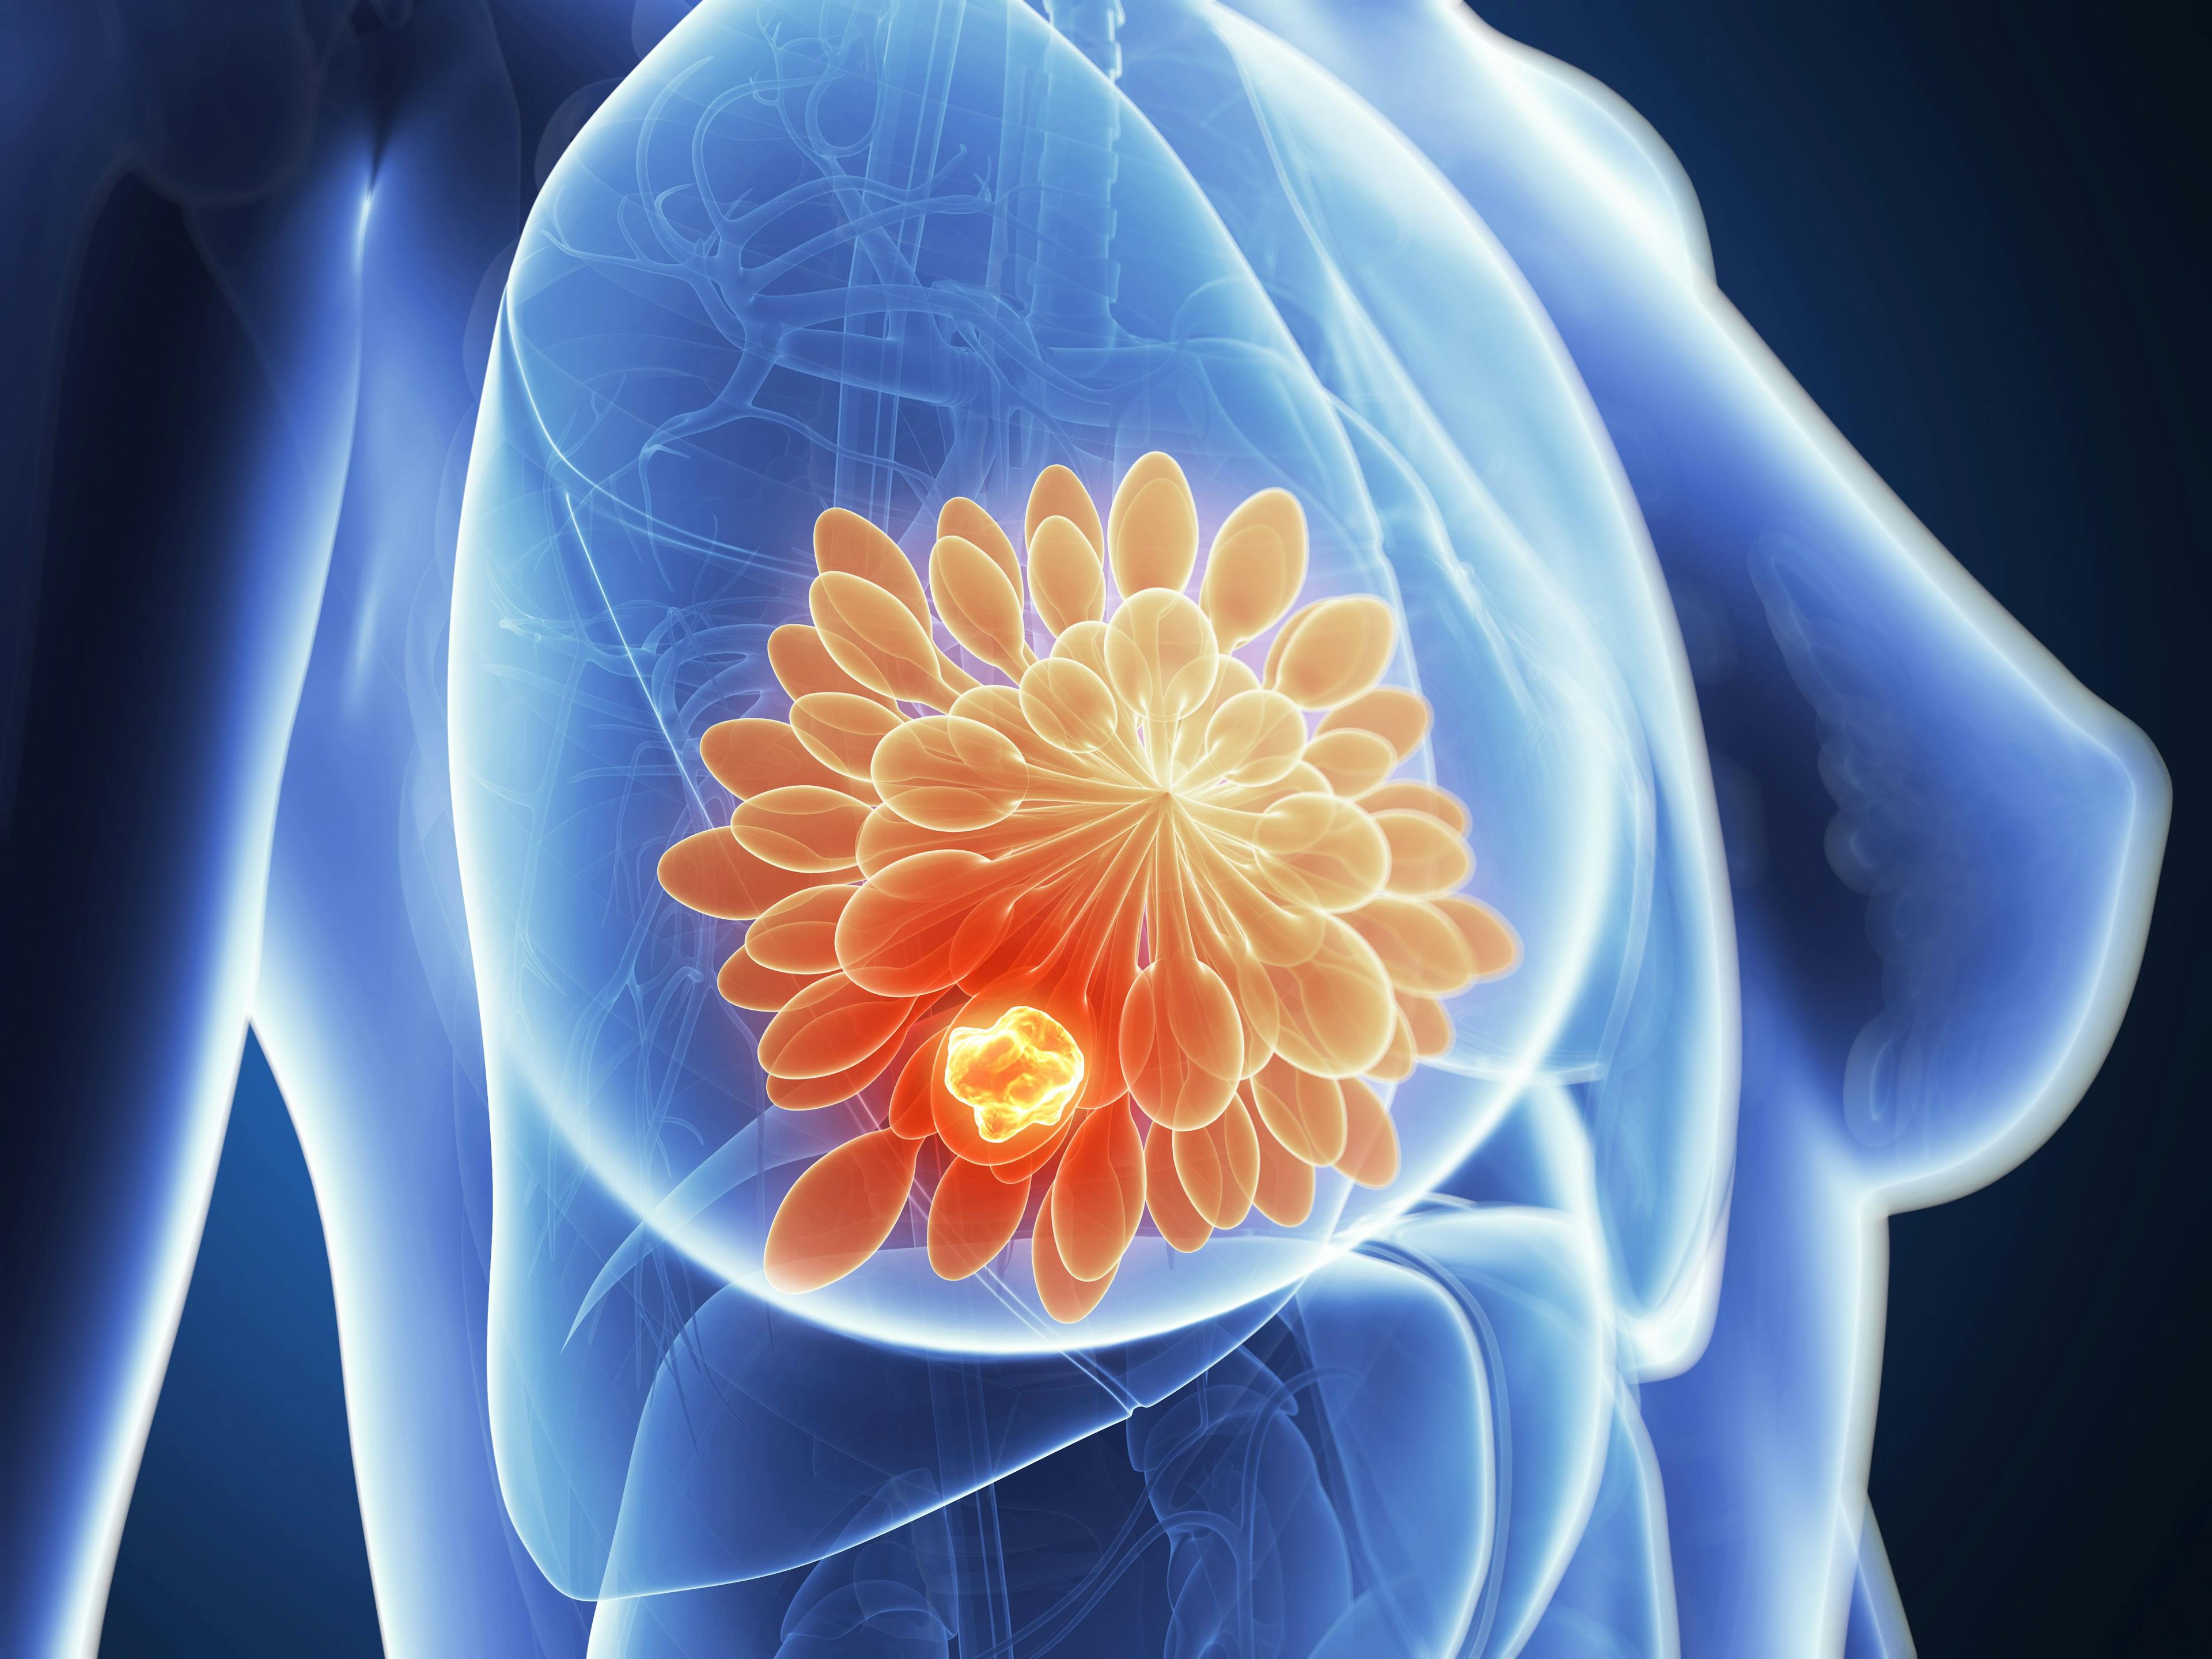 Study: Patients With PD-L1-Positive, High-Risk, ER+/HER2- Breast Cancer Can Achieve Substantial Complete Response Rates With Addition of Nivolumab